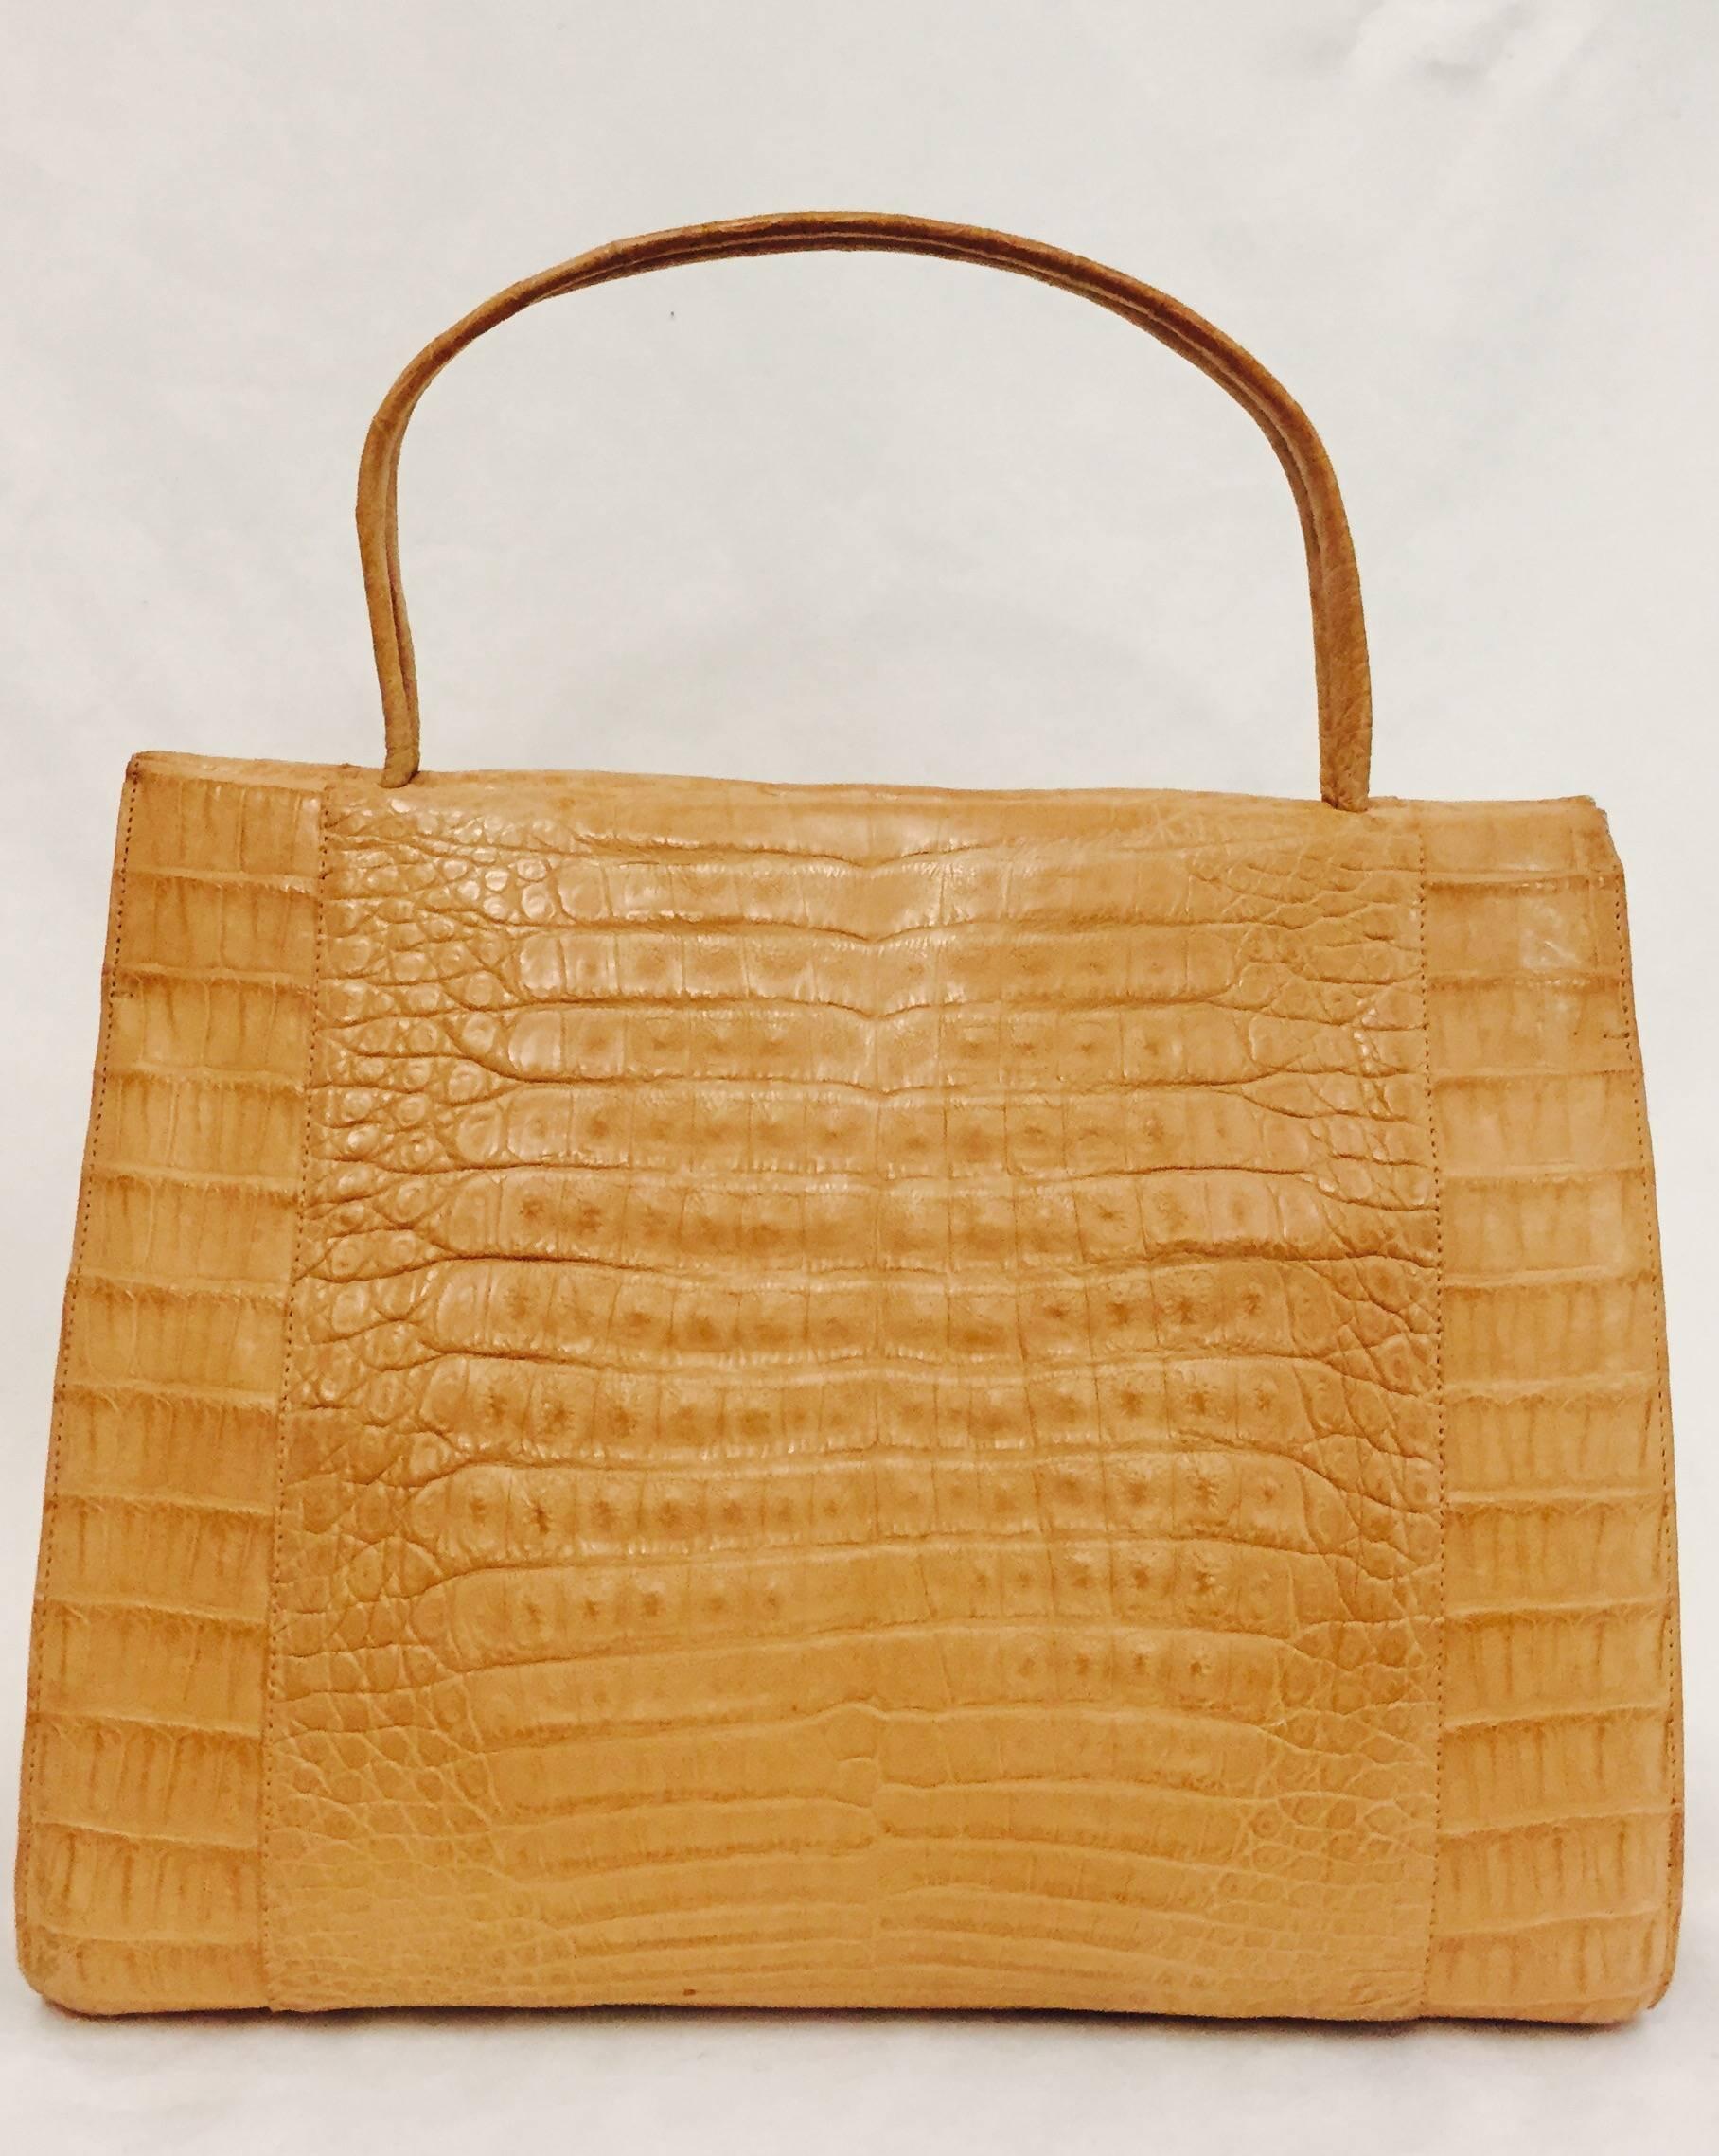 Nancy Gonzalez  Large Wallis tan Caiman Crocodile tote bag opens at top and has two rolled top handles.  One large zip compartment on one side is complemented with smaller zippered slit pocket and other multiple smaller pockets.  Magnetic closure. 